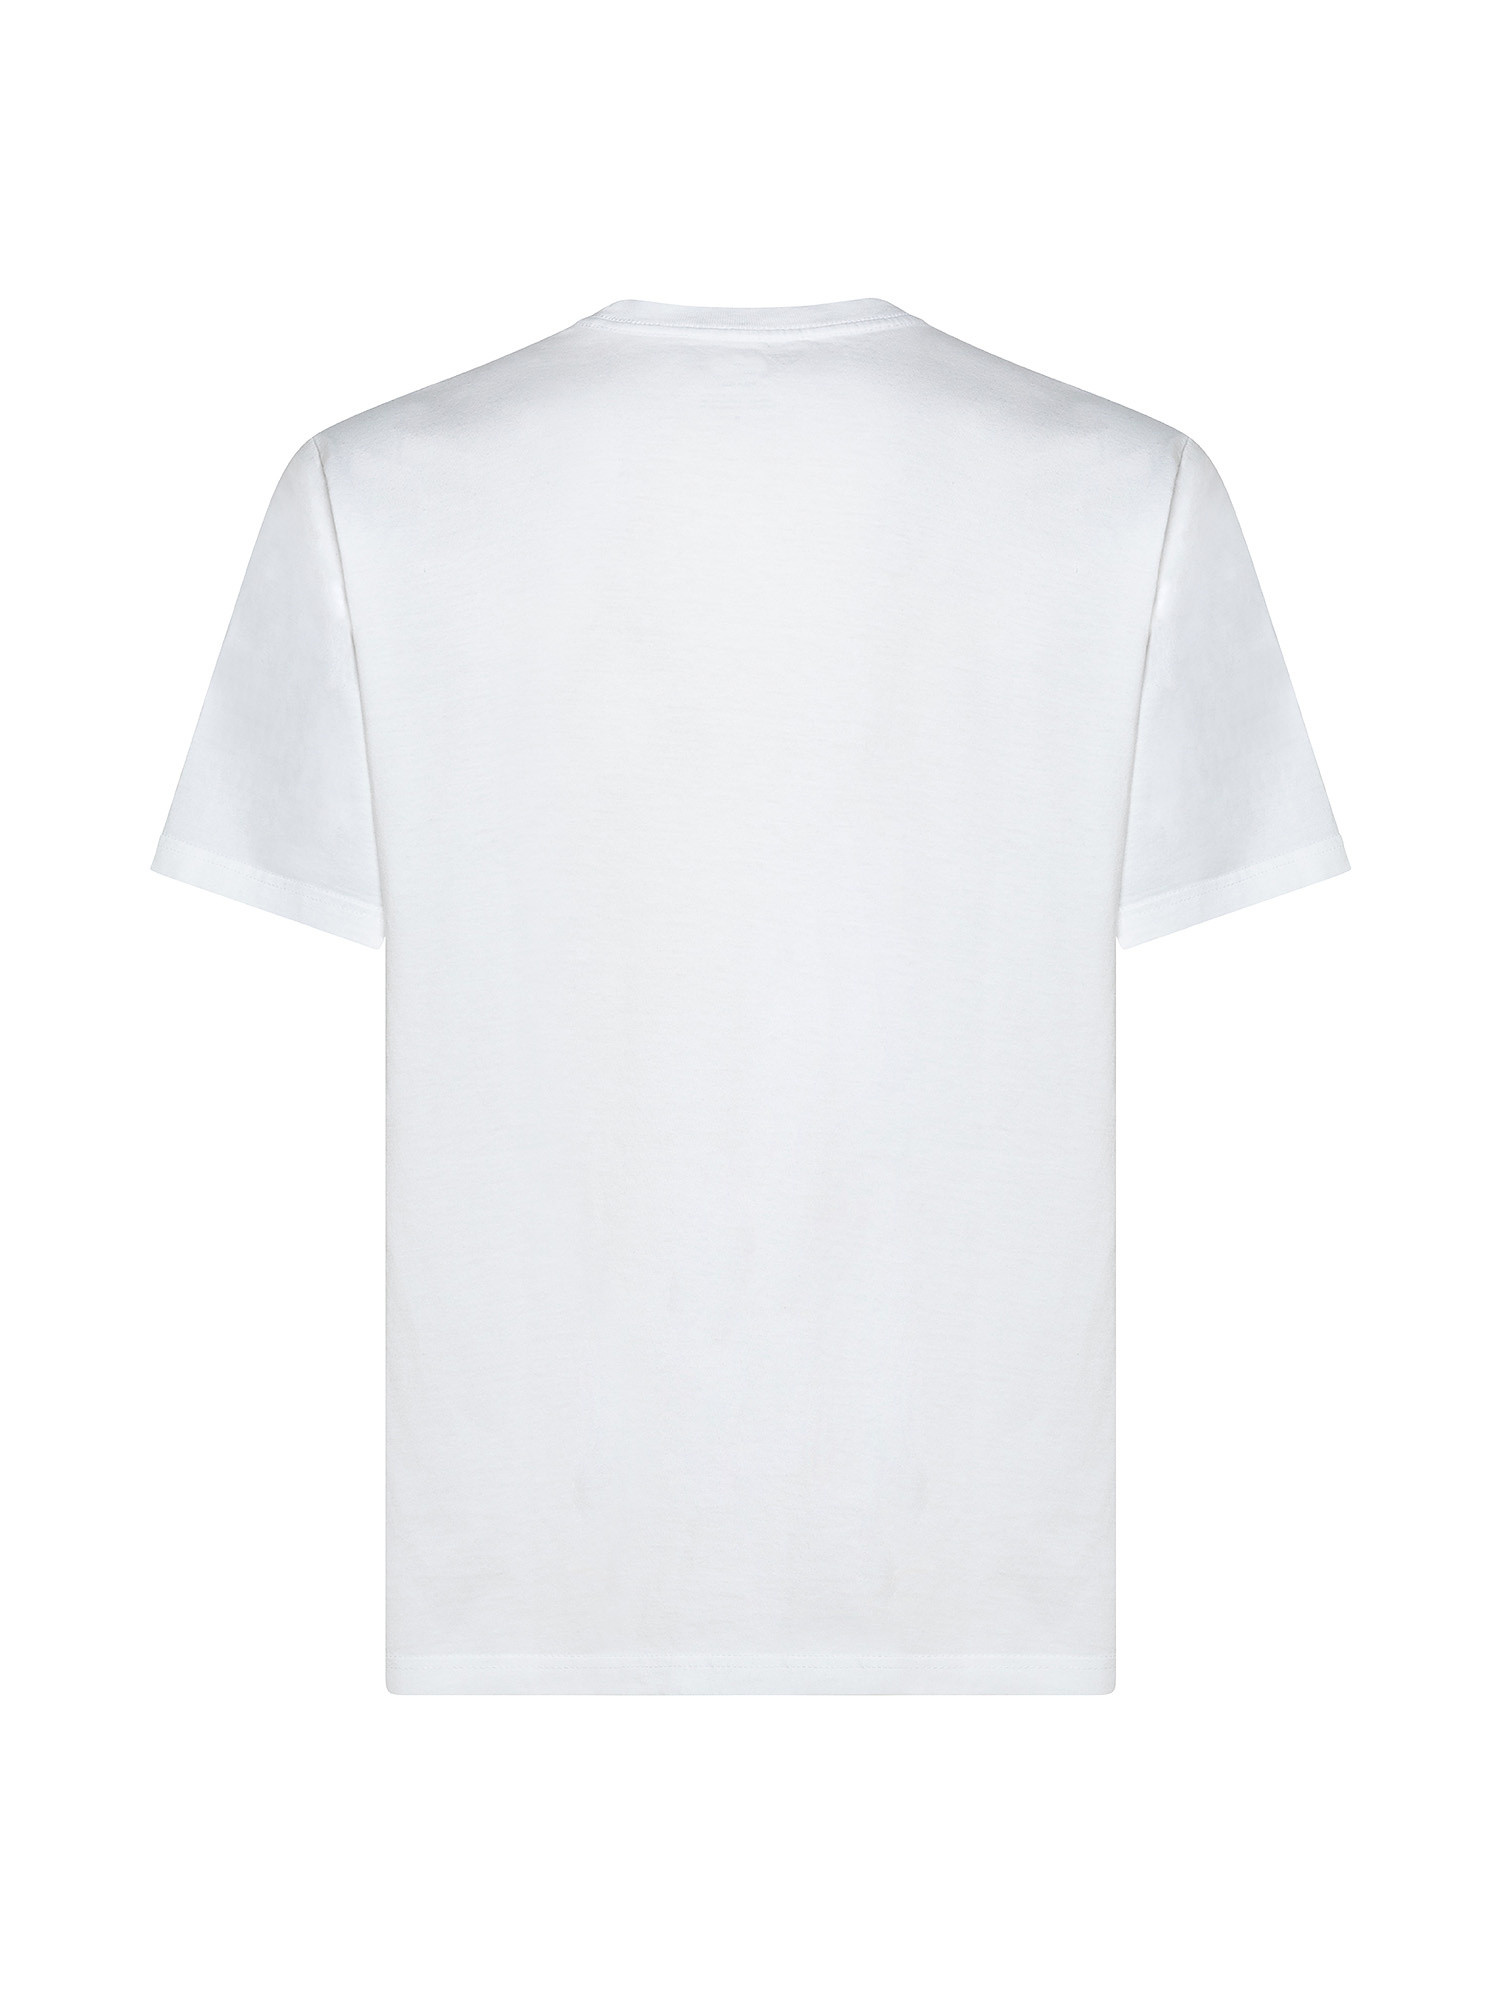 Graphic Tee, White, large image number 1